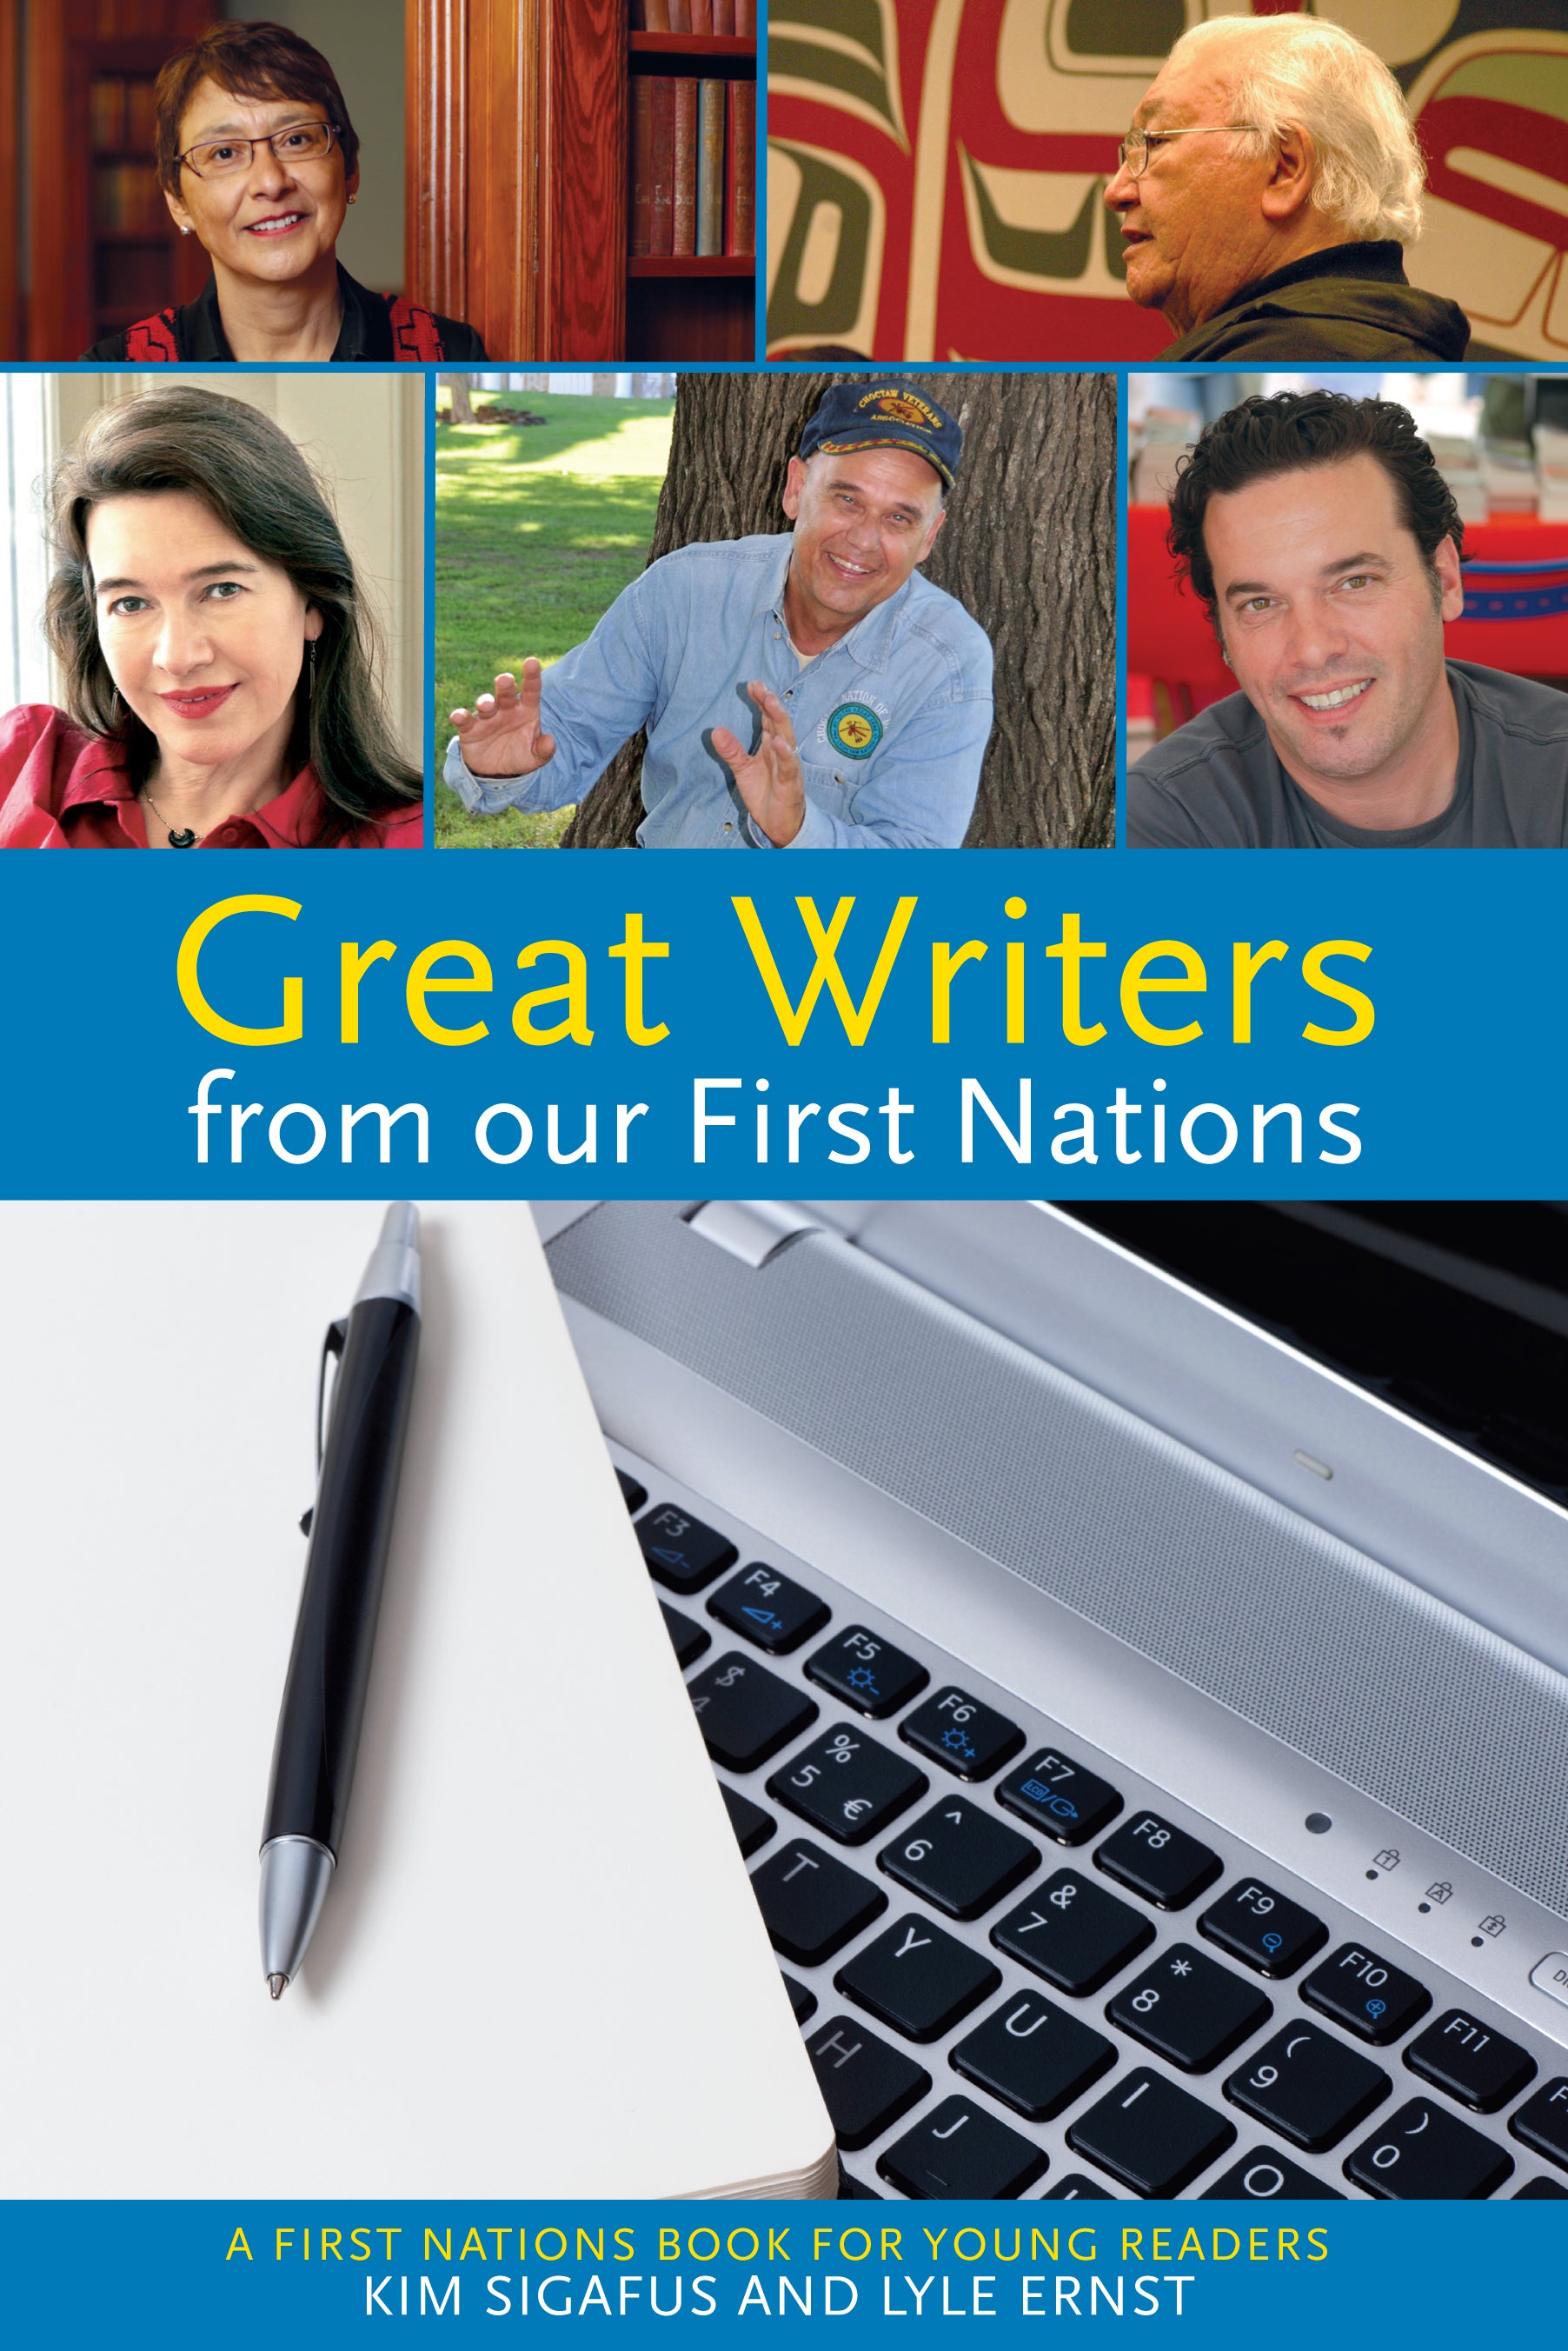 Great Writers from our First Nations